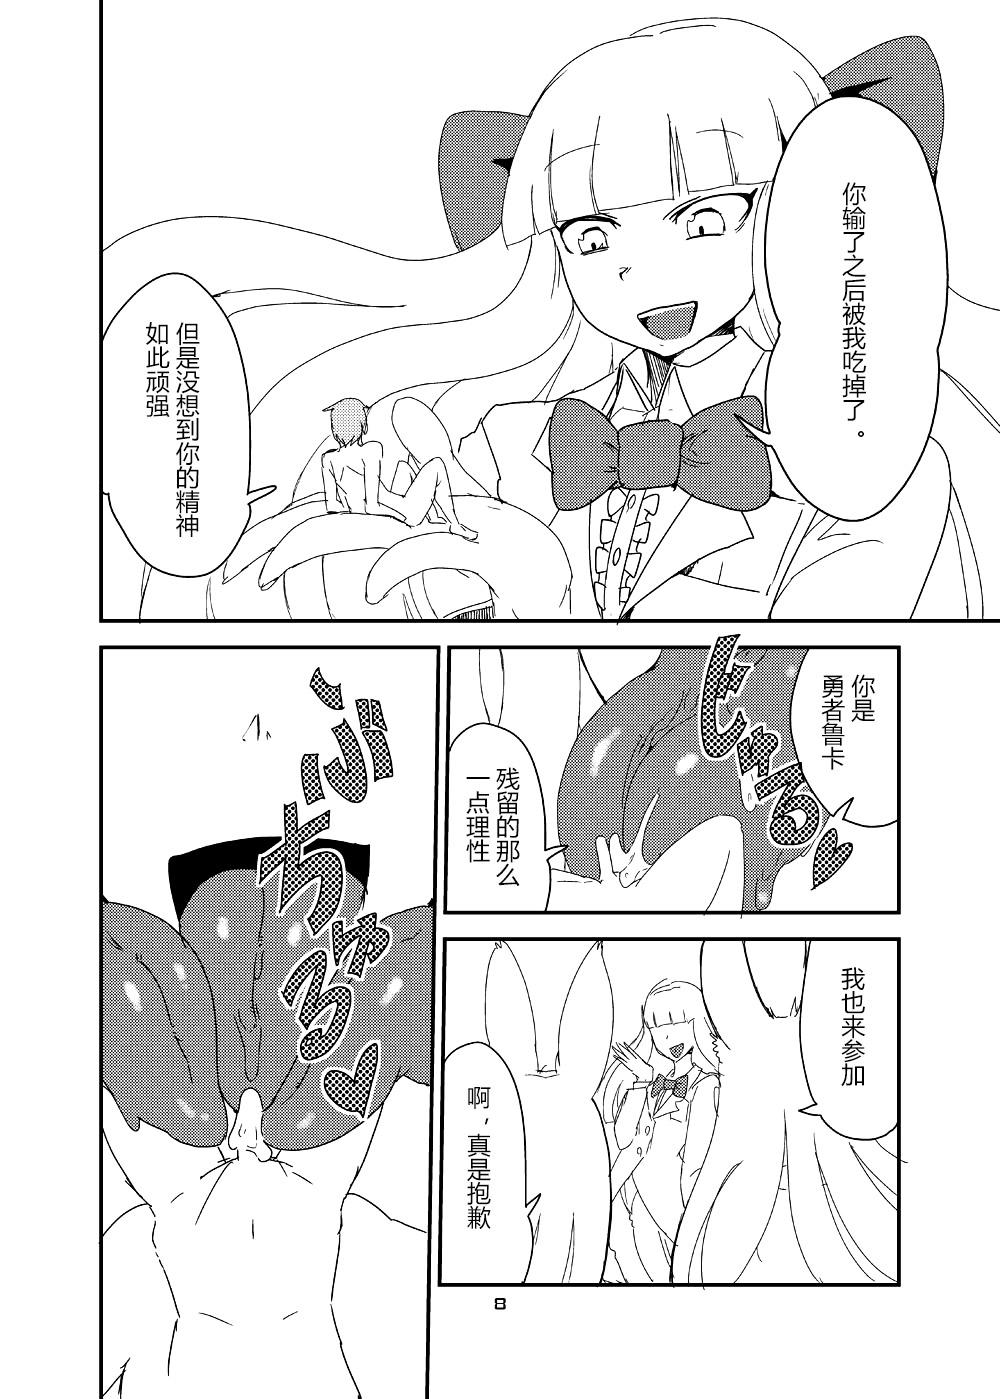 Teen Mon Musu Quest! Beyond The End 6 - Monster girl quest Black Hair - Page 7